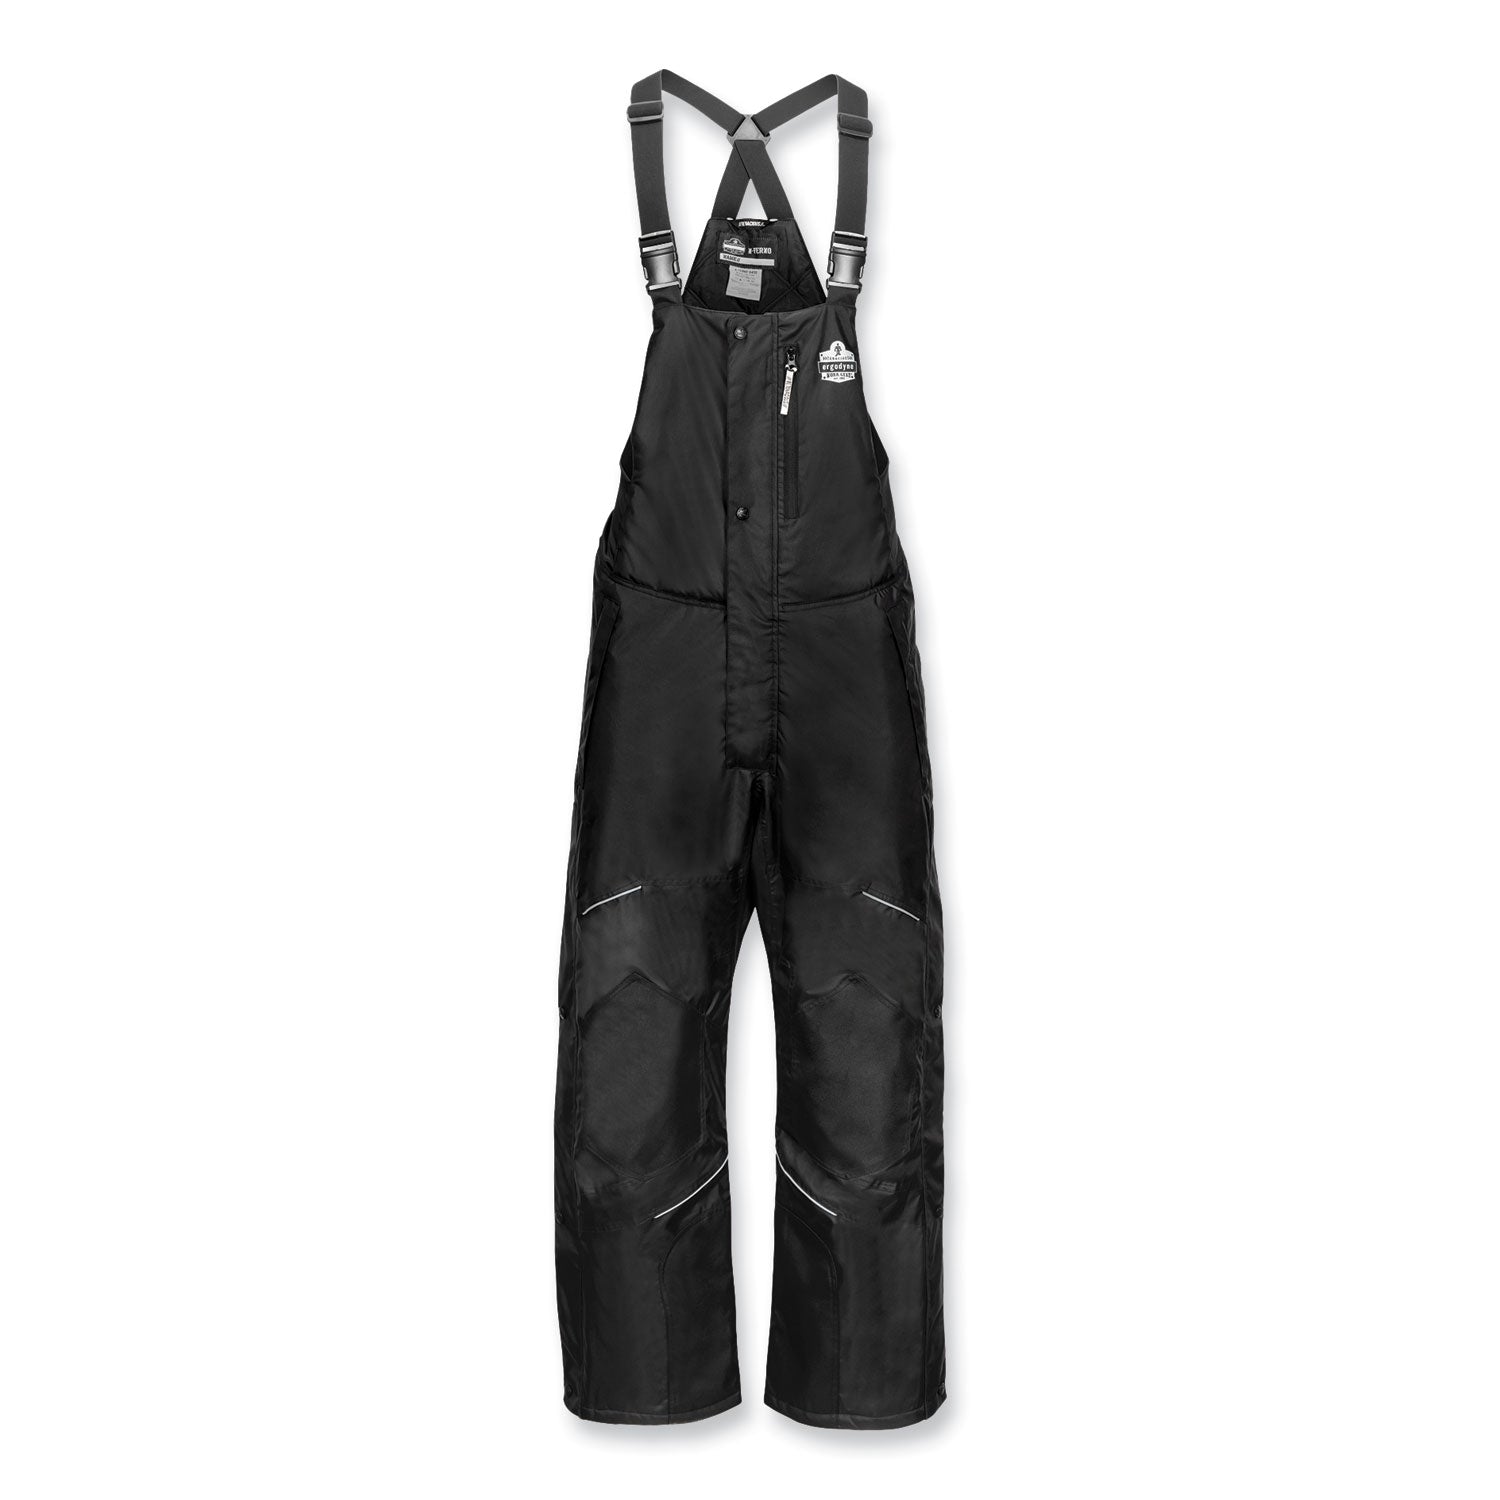 n-ferno-6472-thermal-bib-with-300d-oxford-shell-2x-large-black-ships-in-1-3-business-days_ego41226 - 1